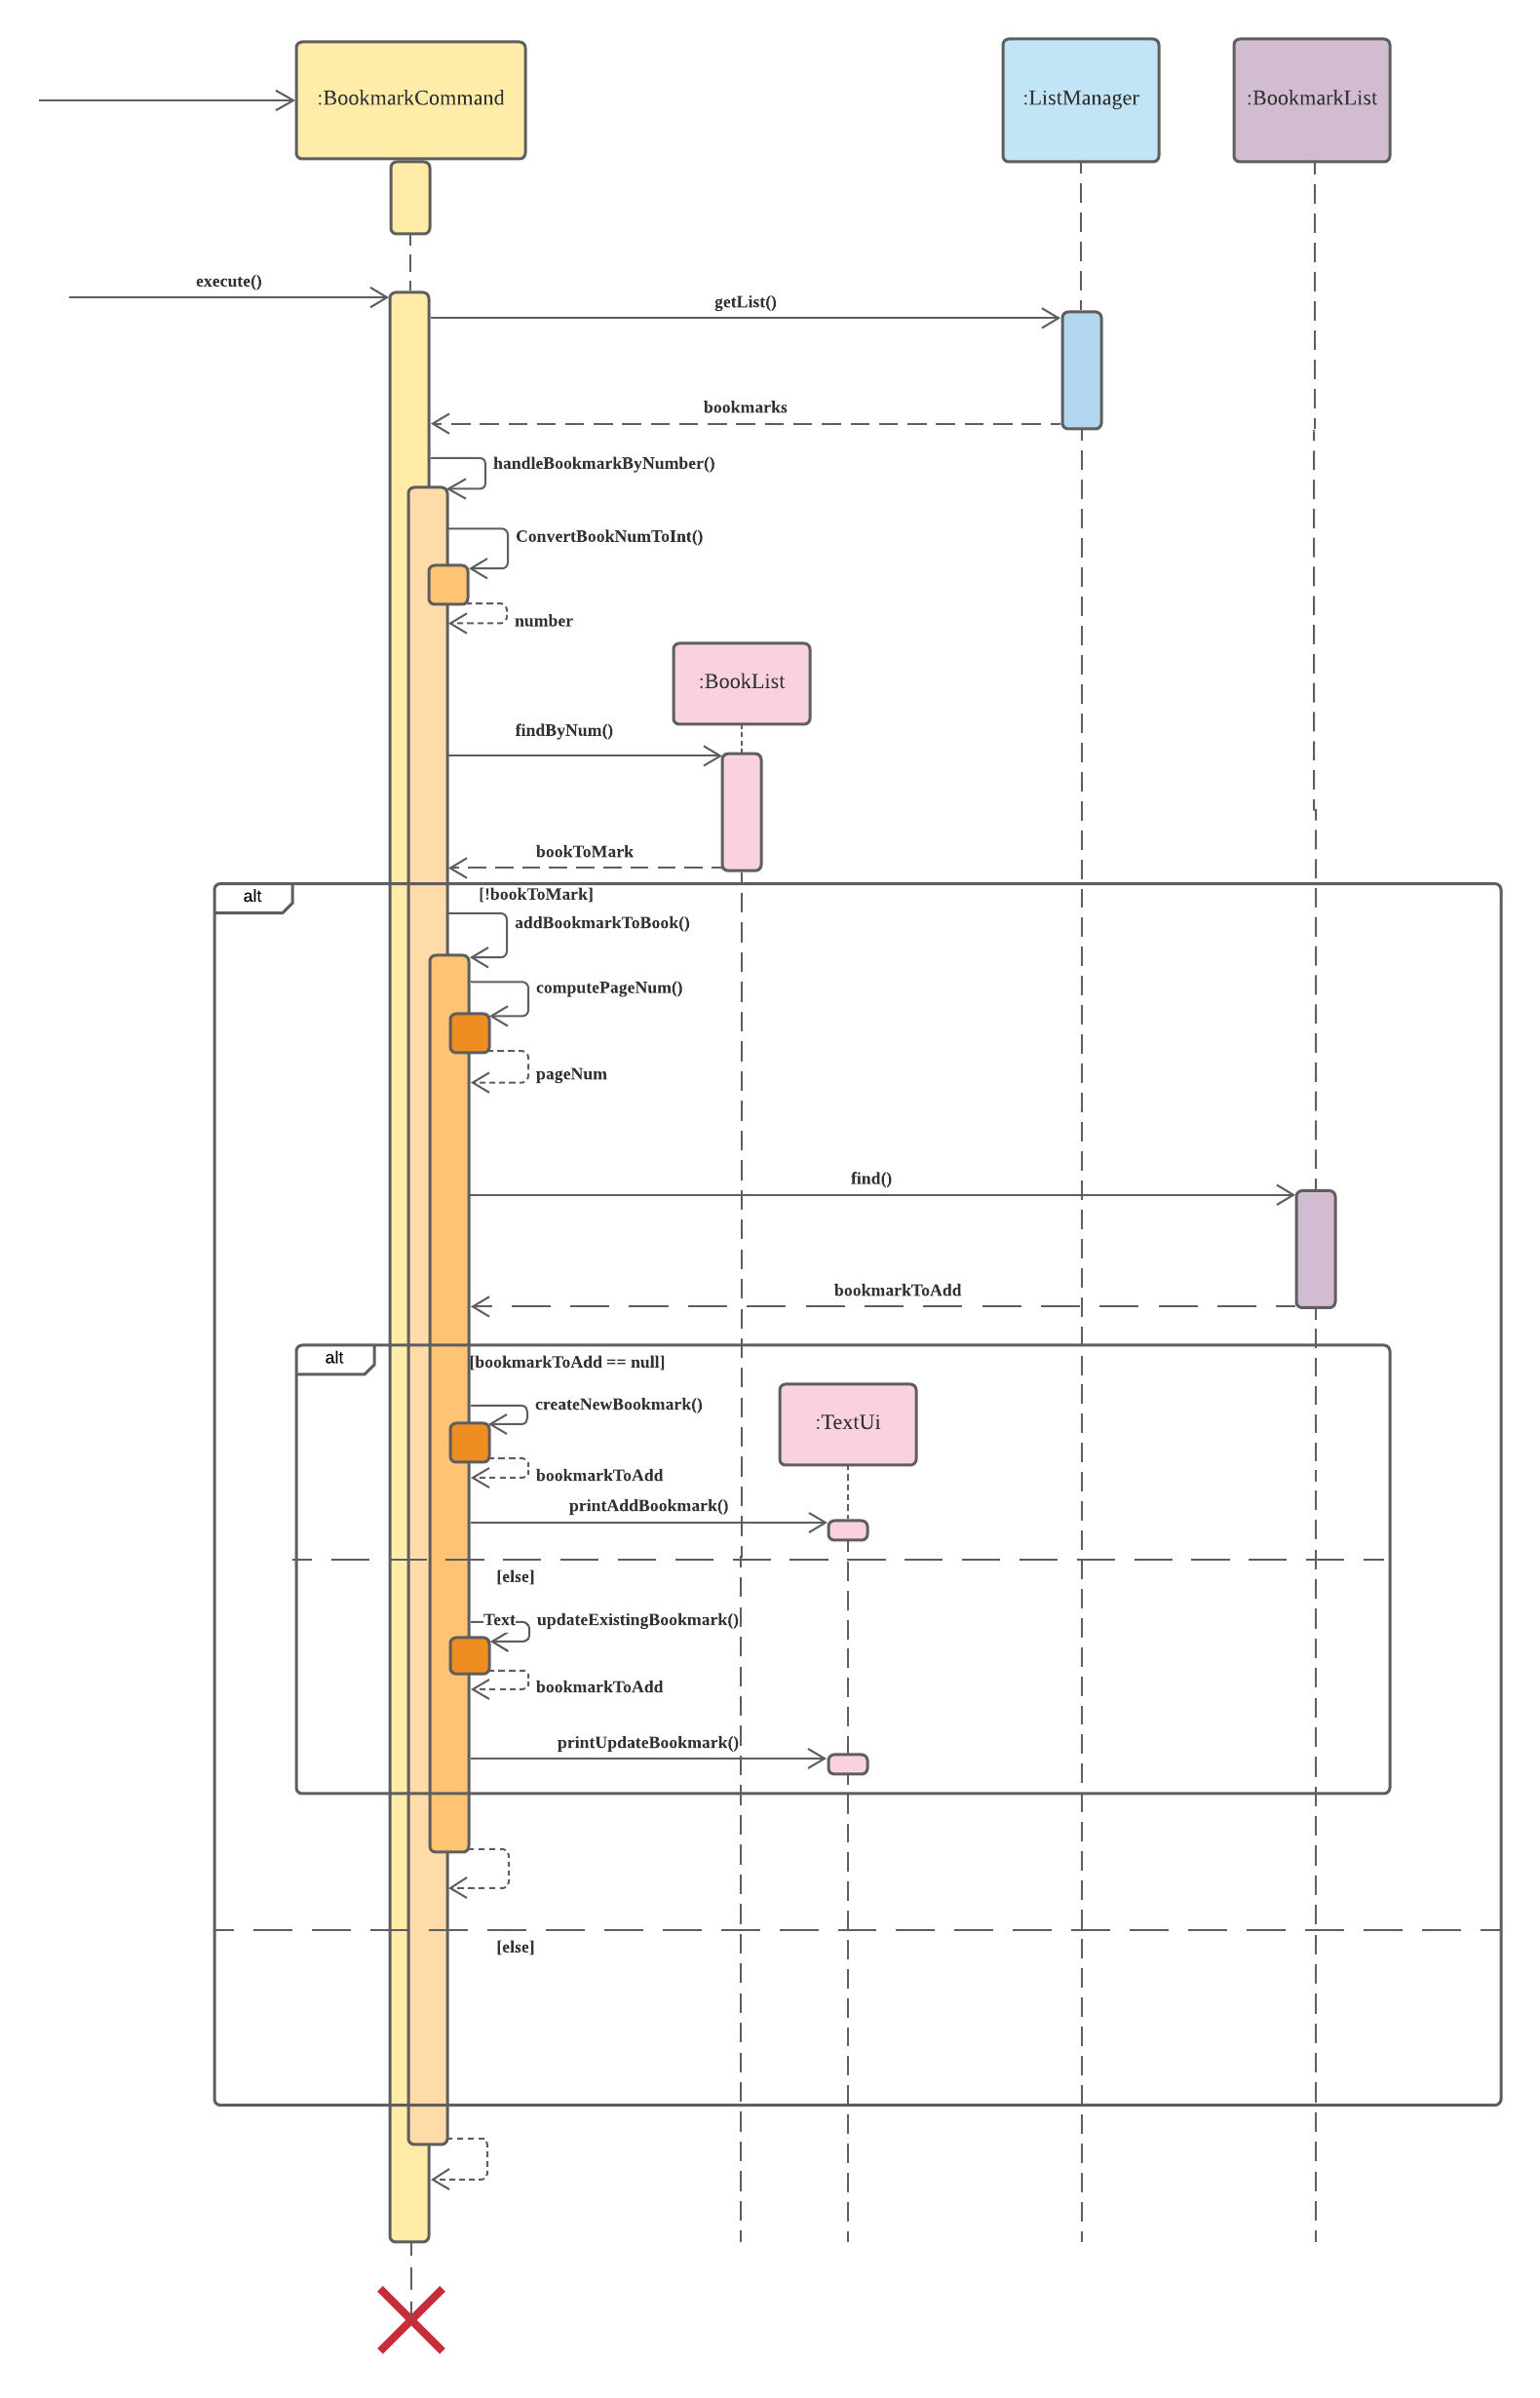 Sequence Diagram for Add Bookmark